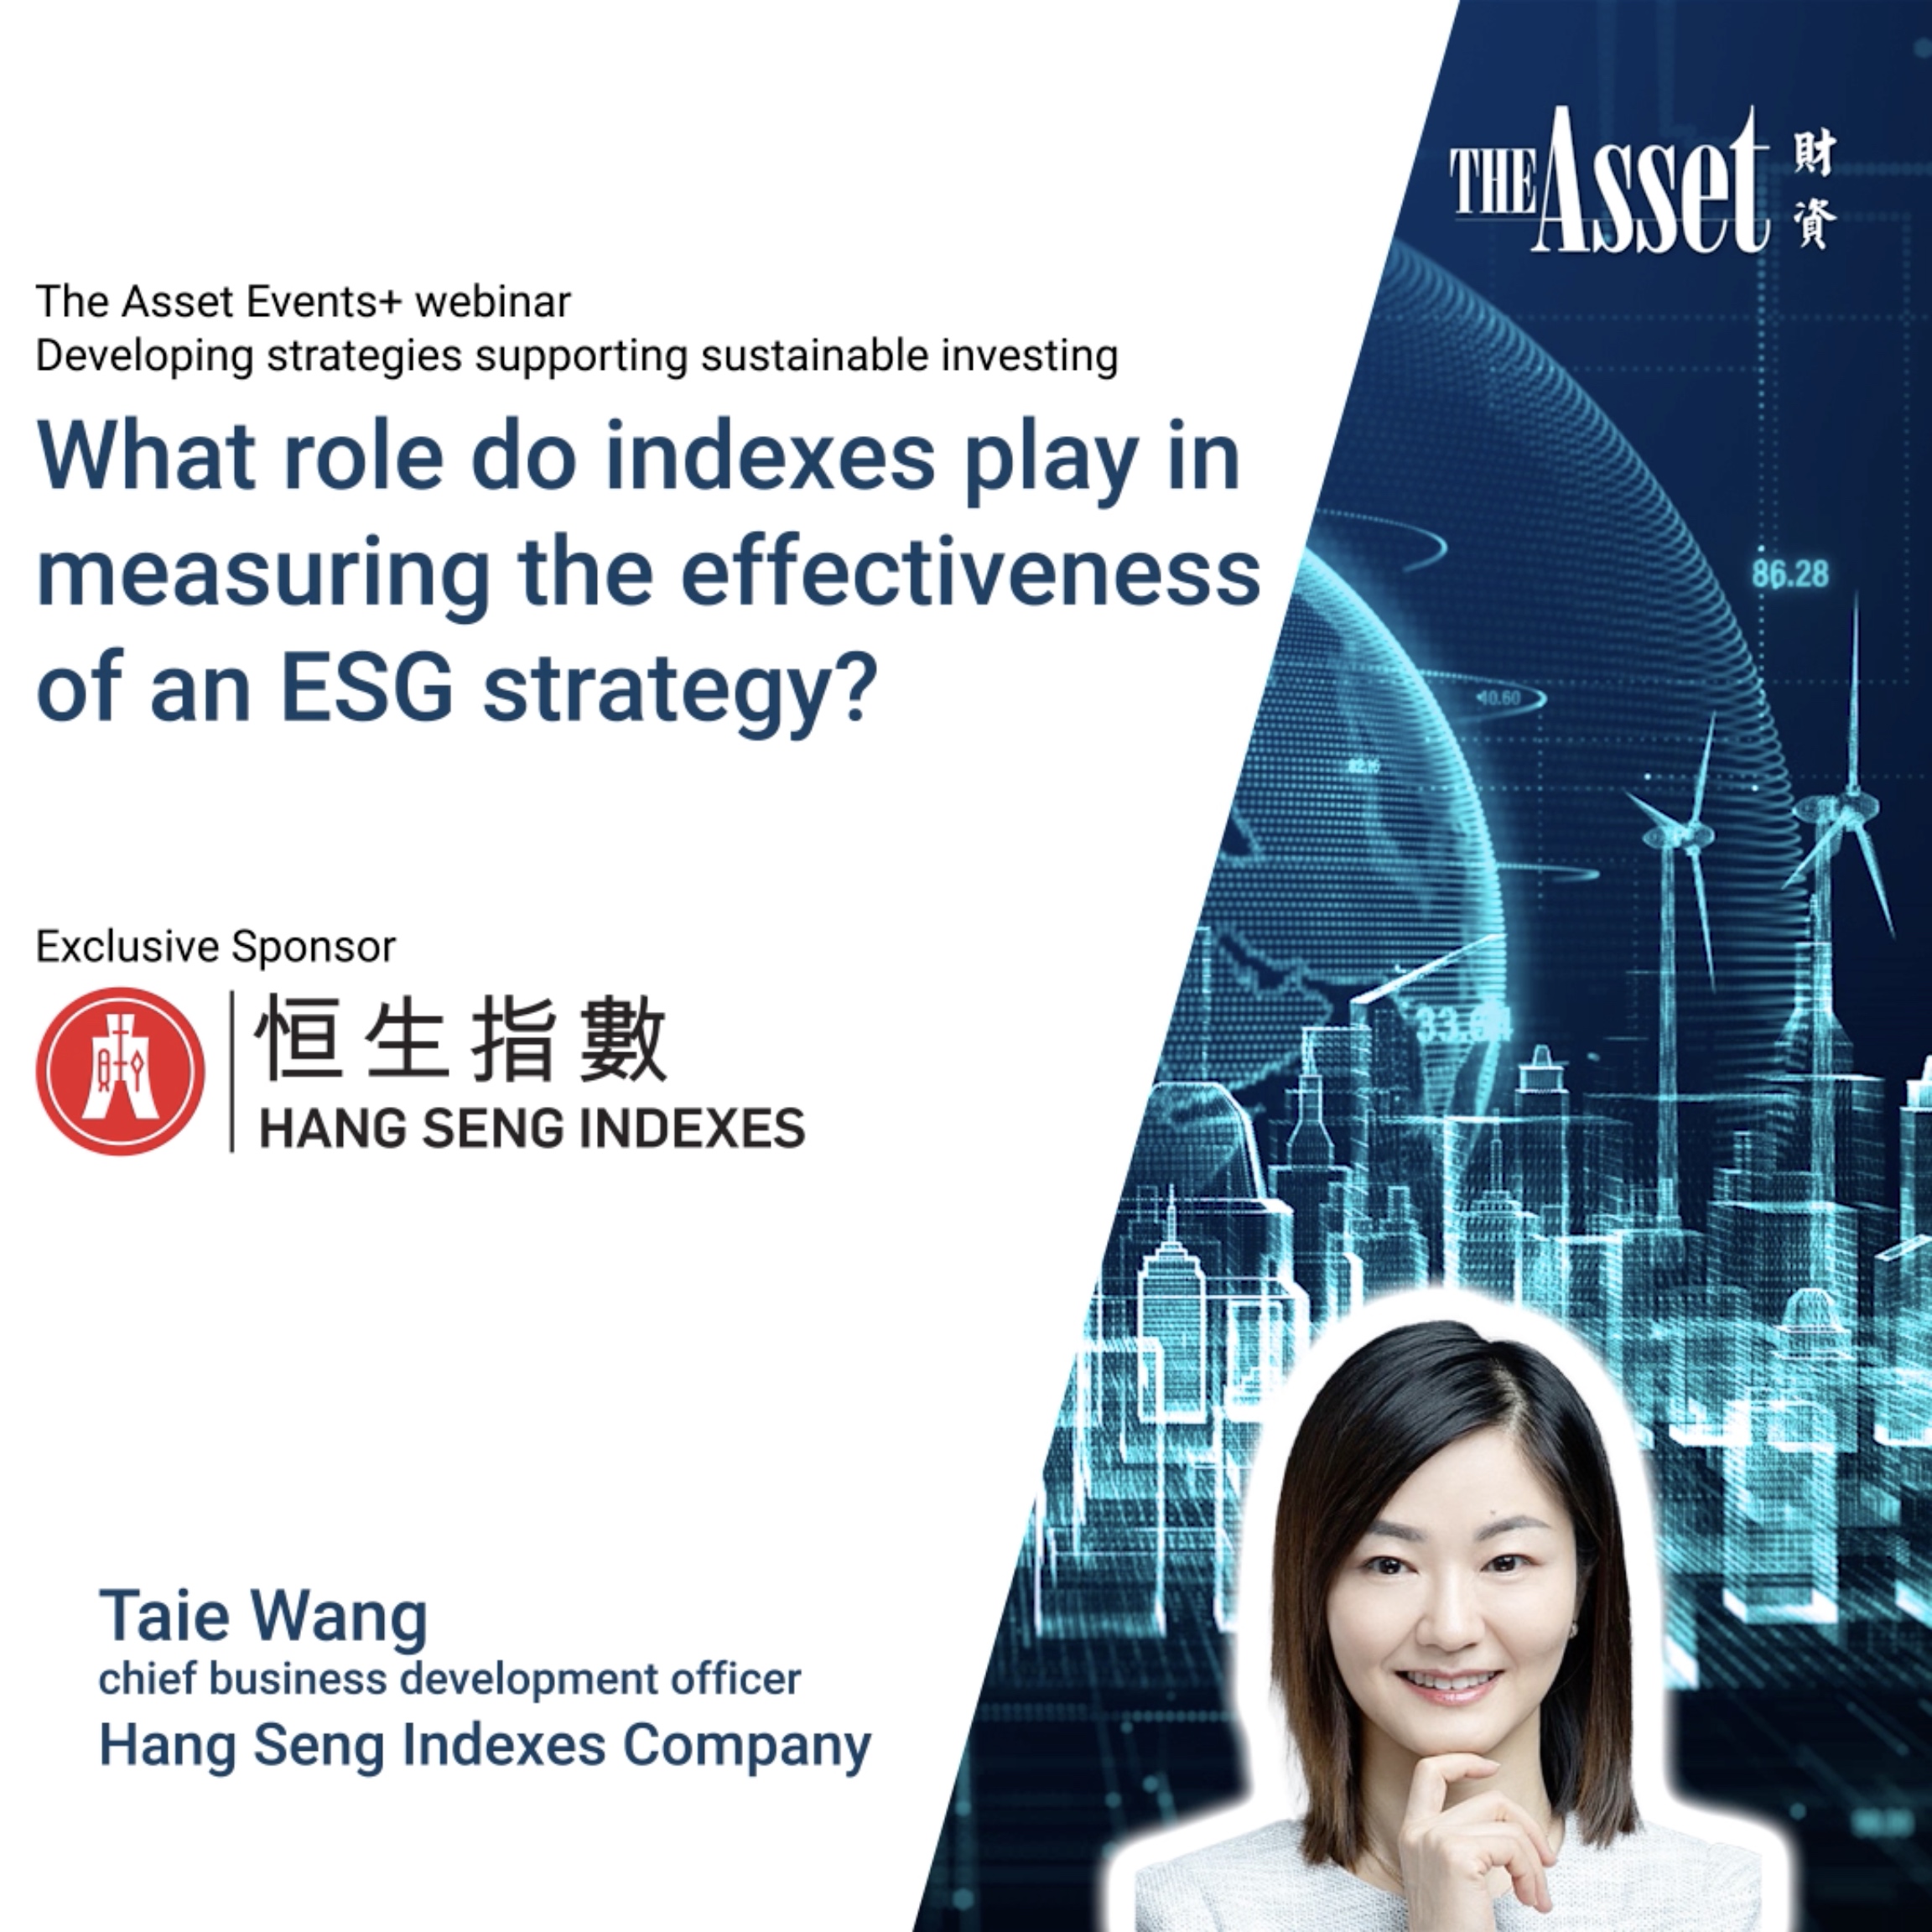 What role do indexes play in measuring the effectiveness of an ESG strategy?